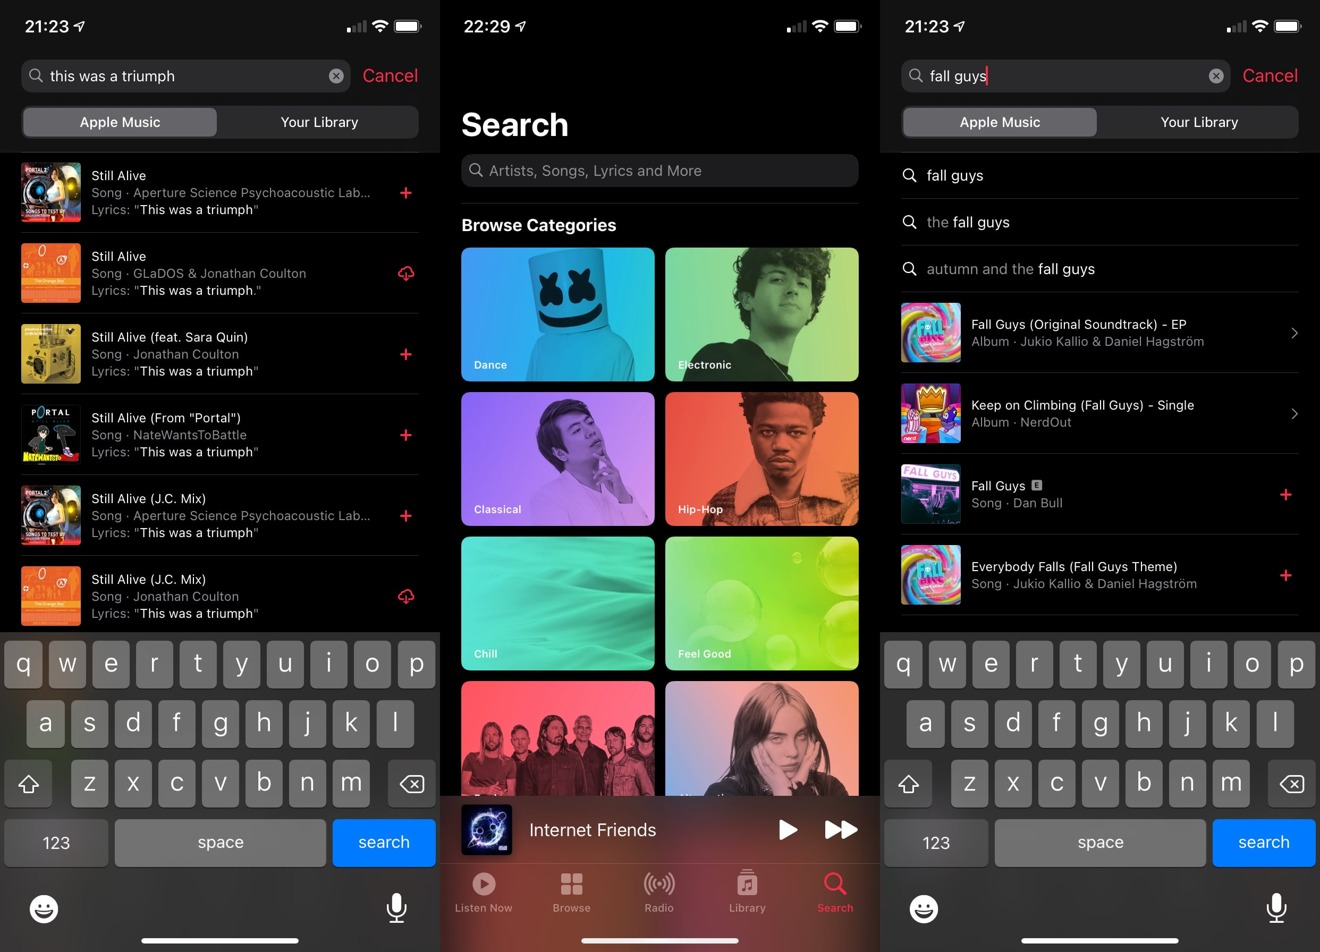 Search by song, artist, lyric, or browse by general mood in Apple Music.